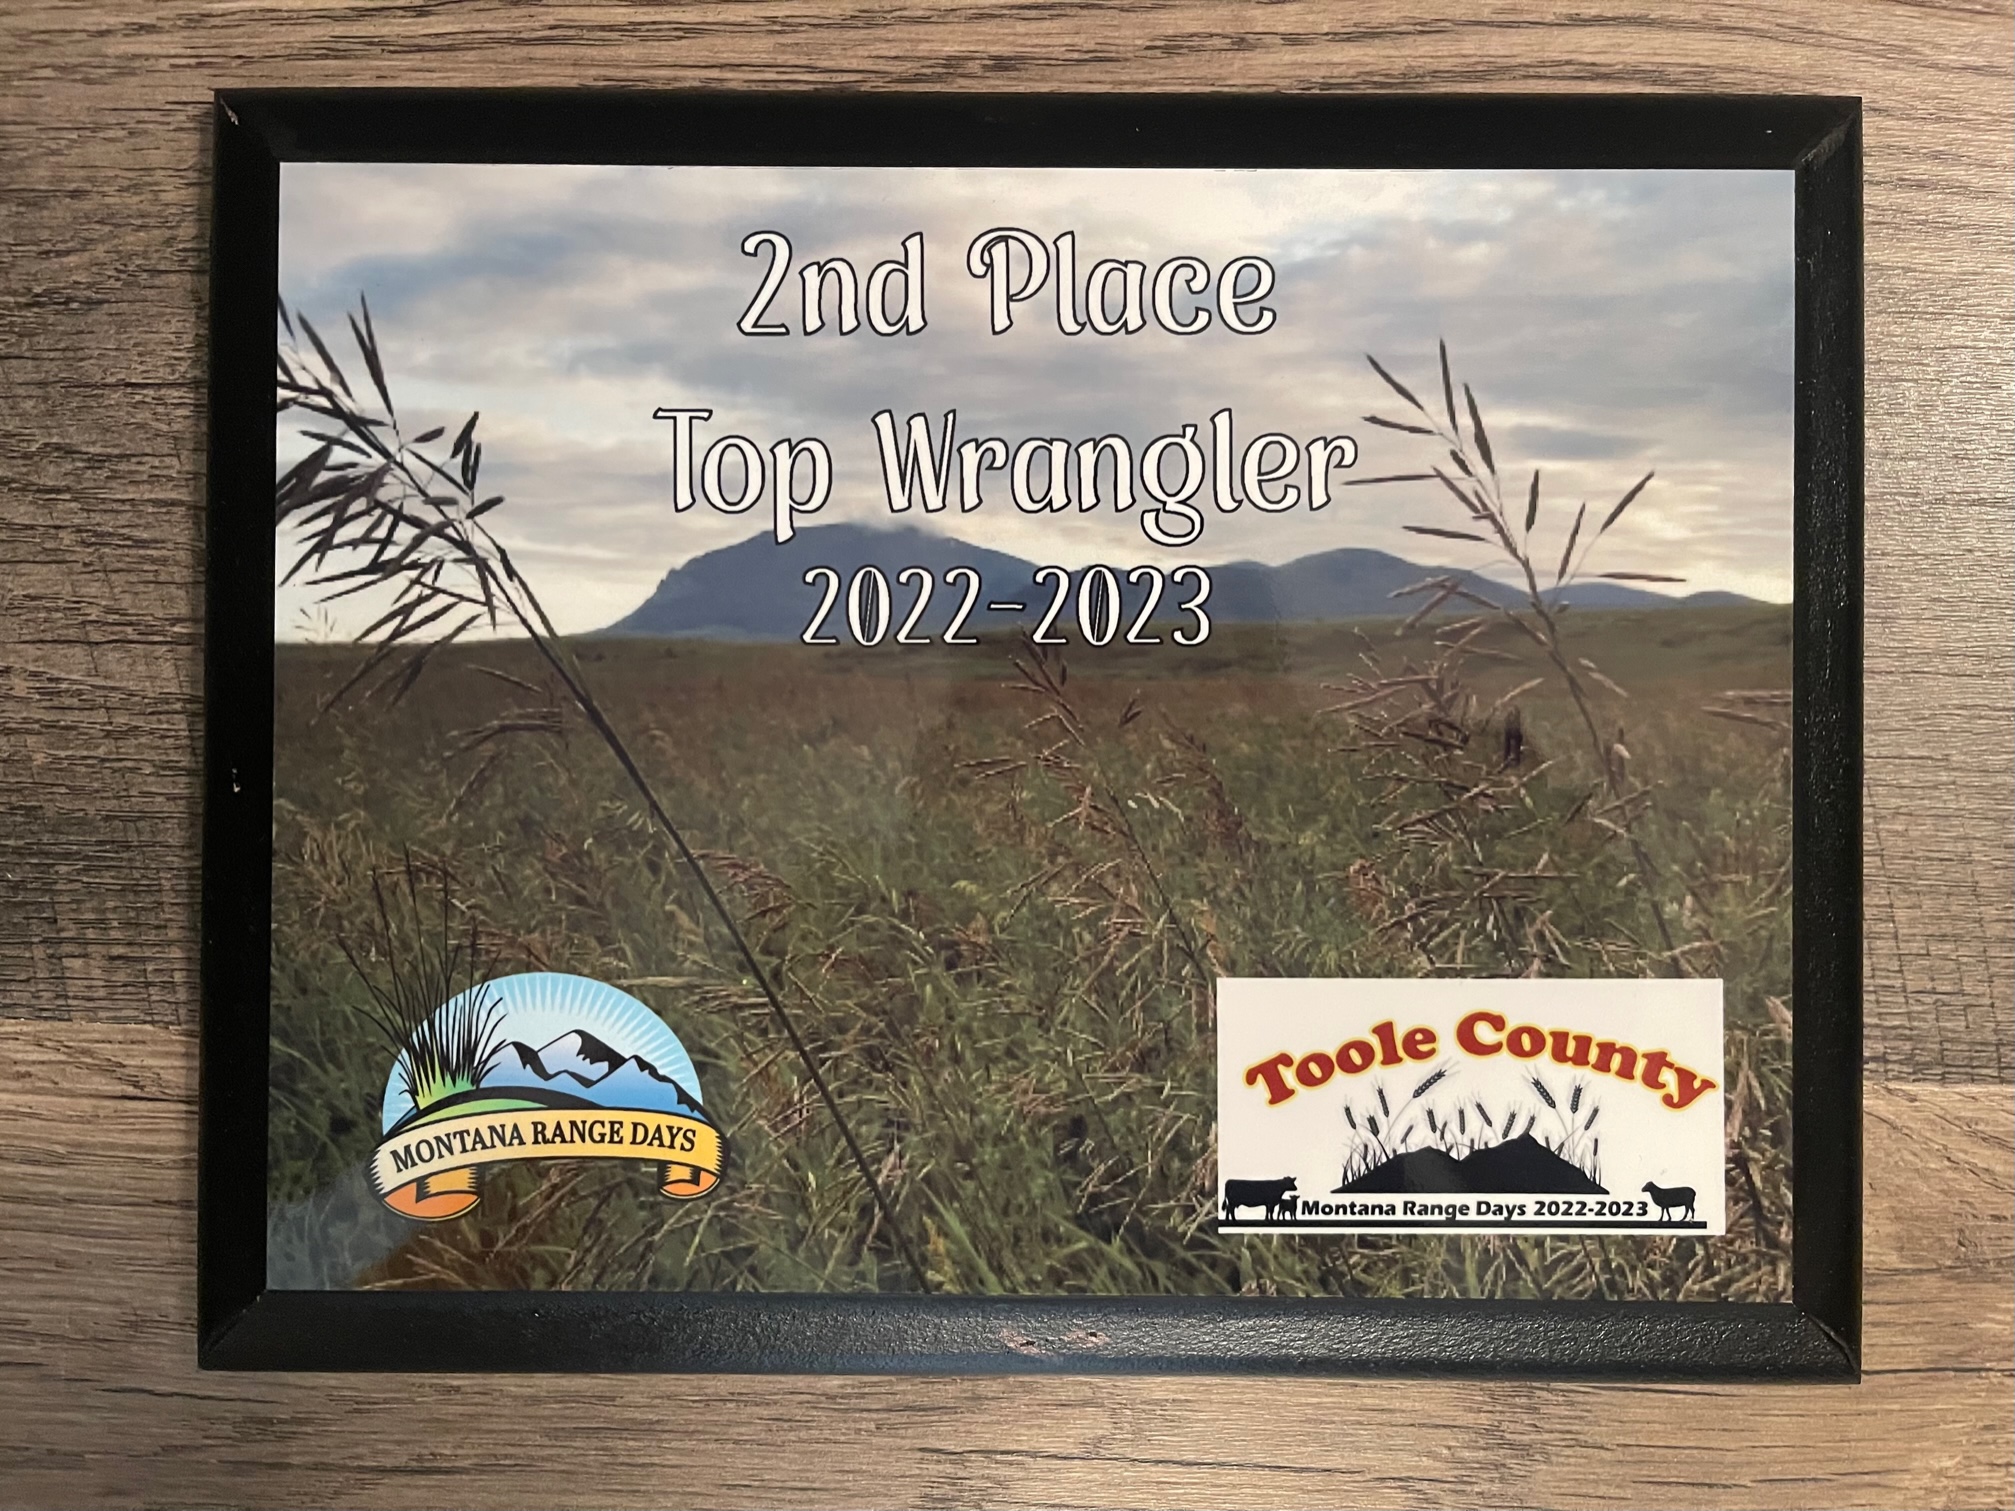 2nd Place Award made with sublimation printing